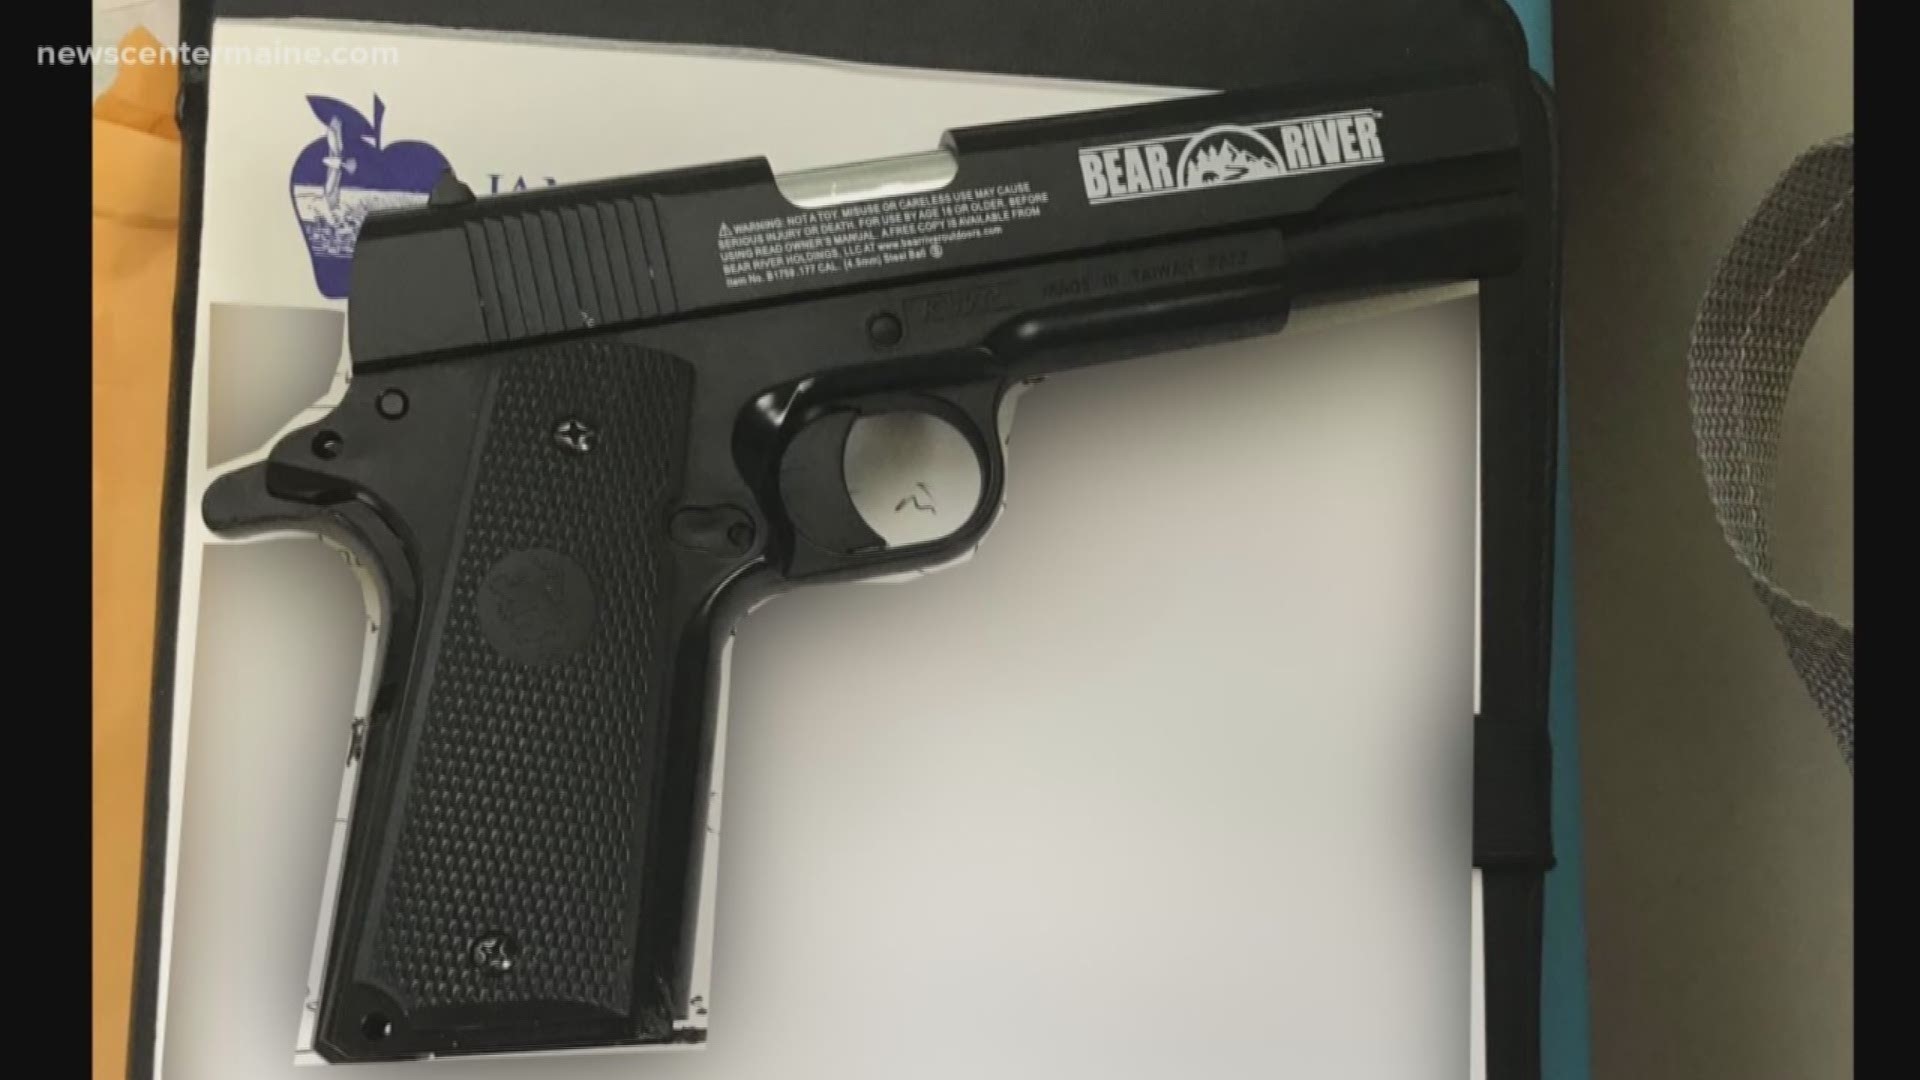 OOB parents concerned after elementary school student brought BB gun to school.